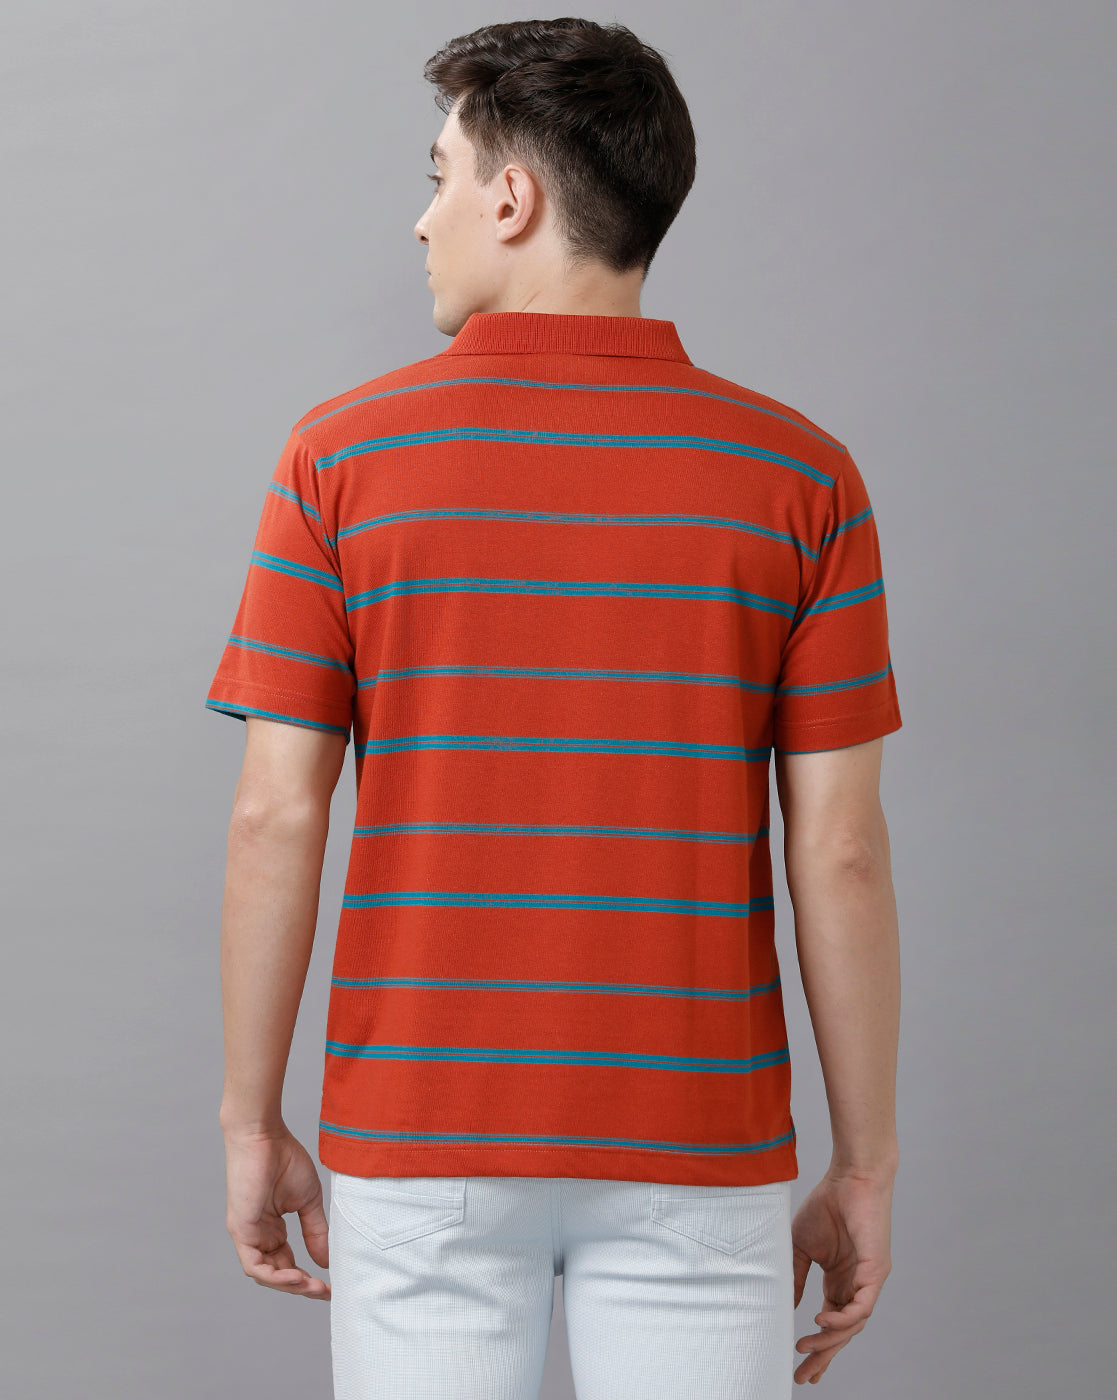 Classic Polo Men's Cotton Blend Striped Half Sleeve Regular Fit Polo Neck Red Color T-Shirt | HS-AVON - 01 A